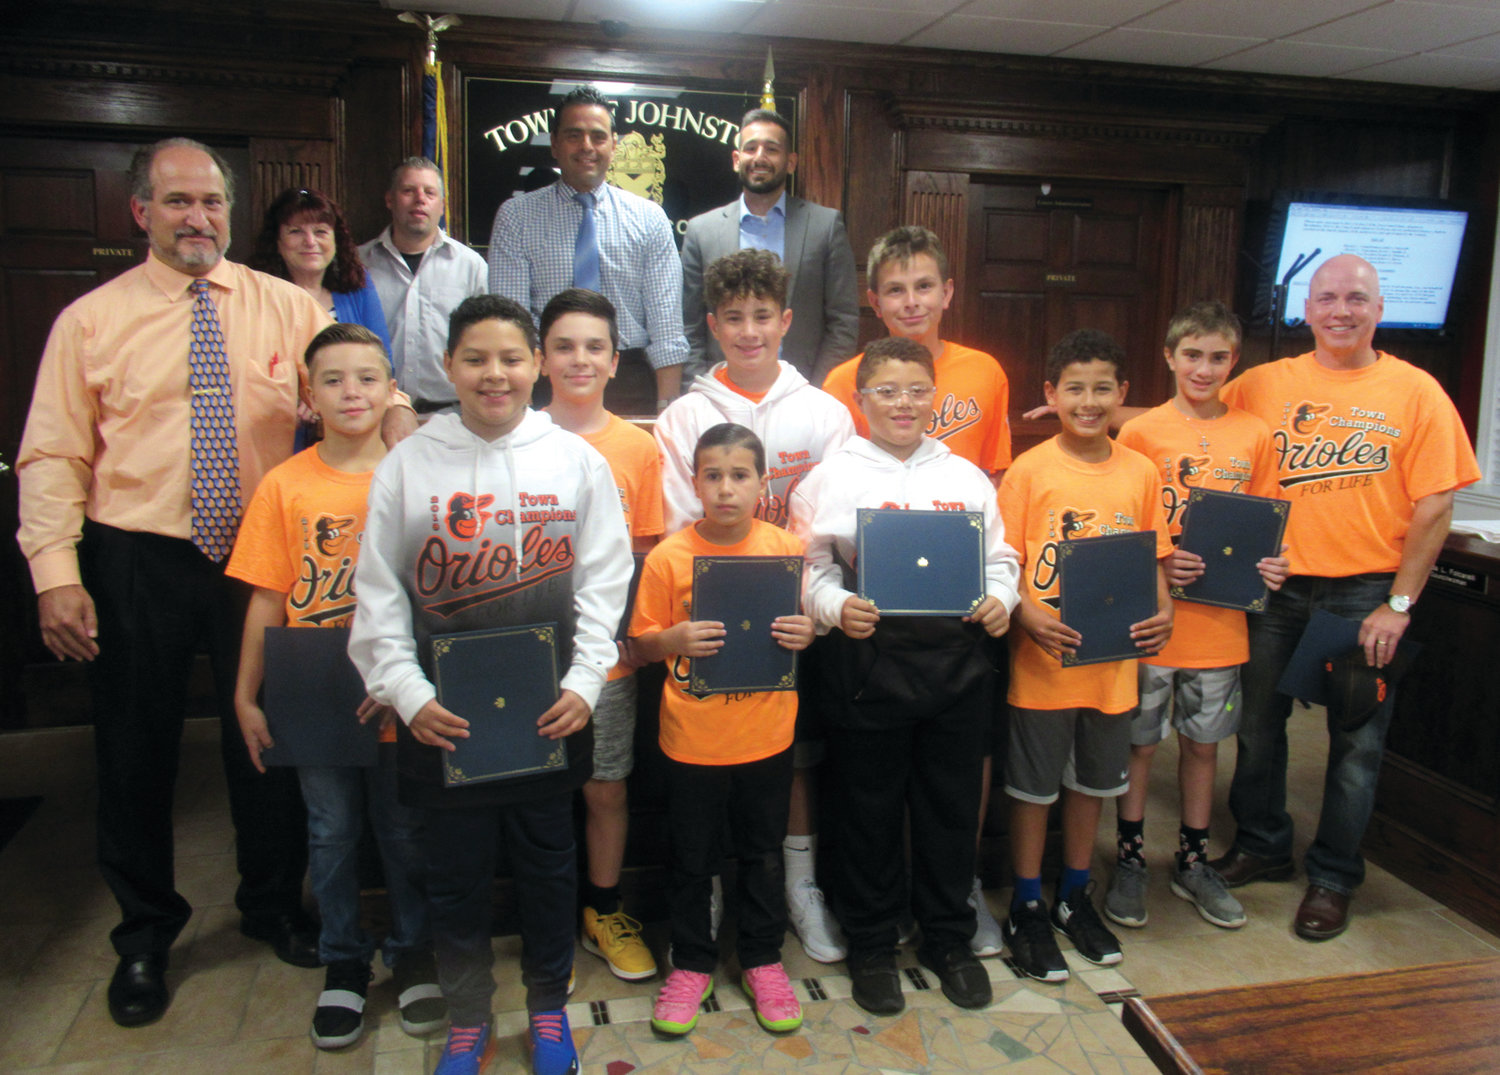 COUNCIL’S CHAMPS: Among the coaches and players who were honored by the Johnston Town Council Monday night are, in front from left: Councilman/coach Robert Civetti, Christian Ferrante, Jayden Calcagno, Max Mousseau, Fabian Aleman, Dean Paris, Antonio Morales, Tyler Holton, Anthony Vendetti, Assistant Coach Chris Civetti and Manager Mike Mousseau. Back: Council members Linda Folcarelli, David Santilli Jr., President Robert V. Russo and Joseph Polisena.